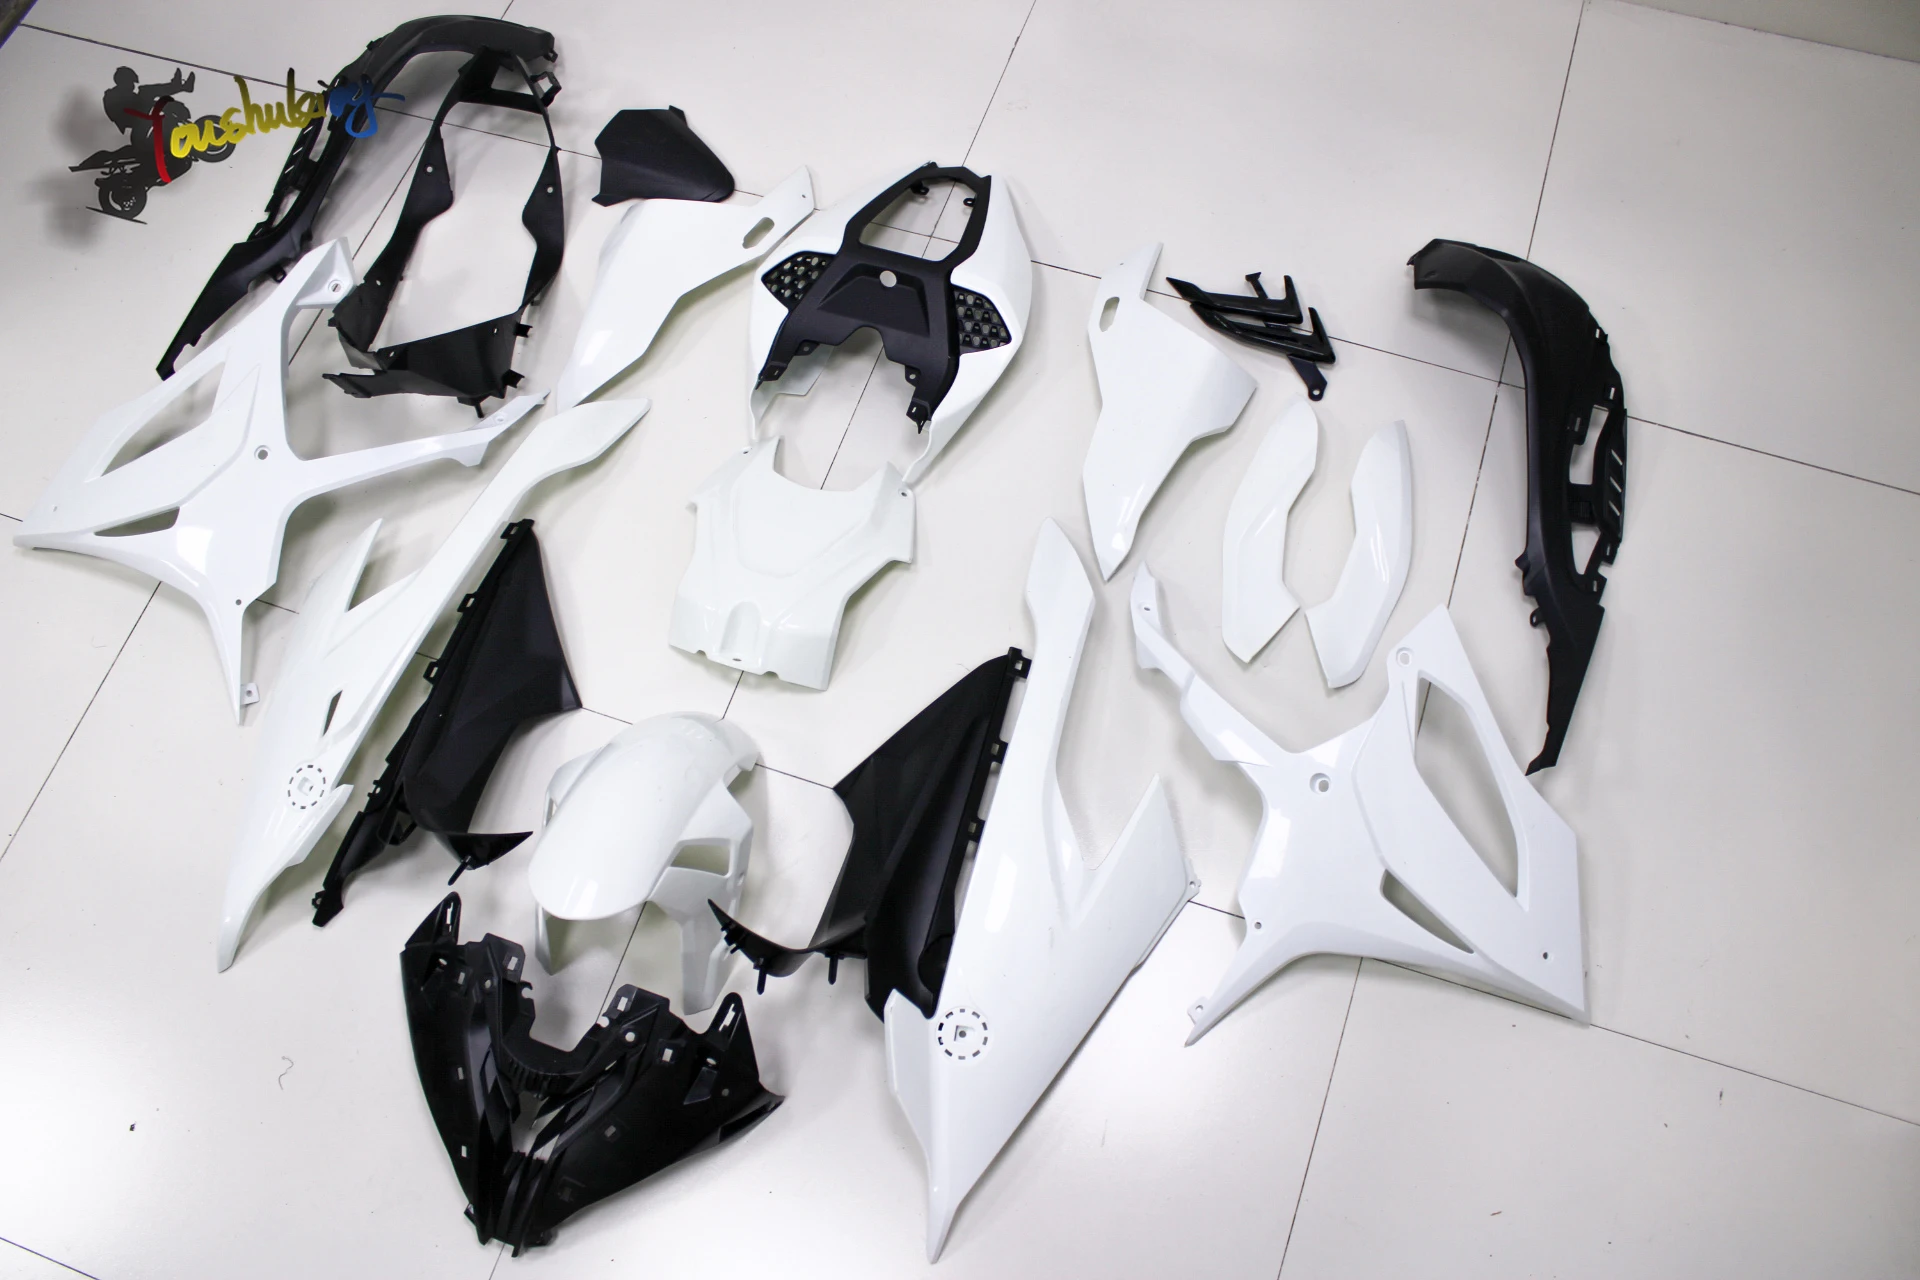 For S1000RR S1000 RR 2019 2020 2021 Motorcycle Fairing, High-quality ABS Plastic, No Color New